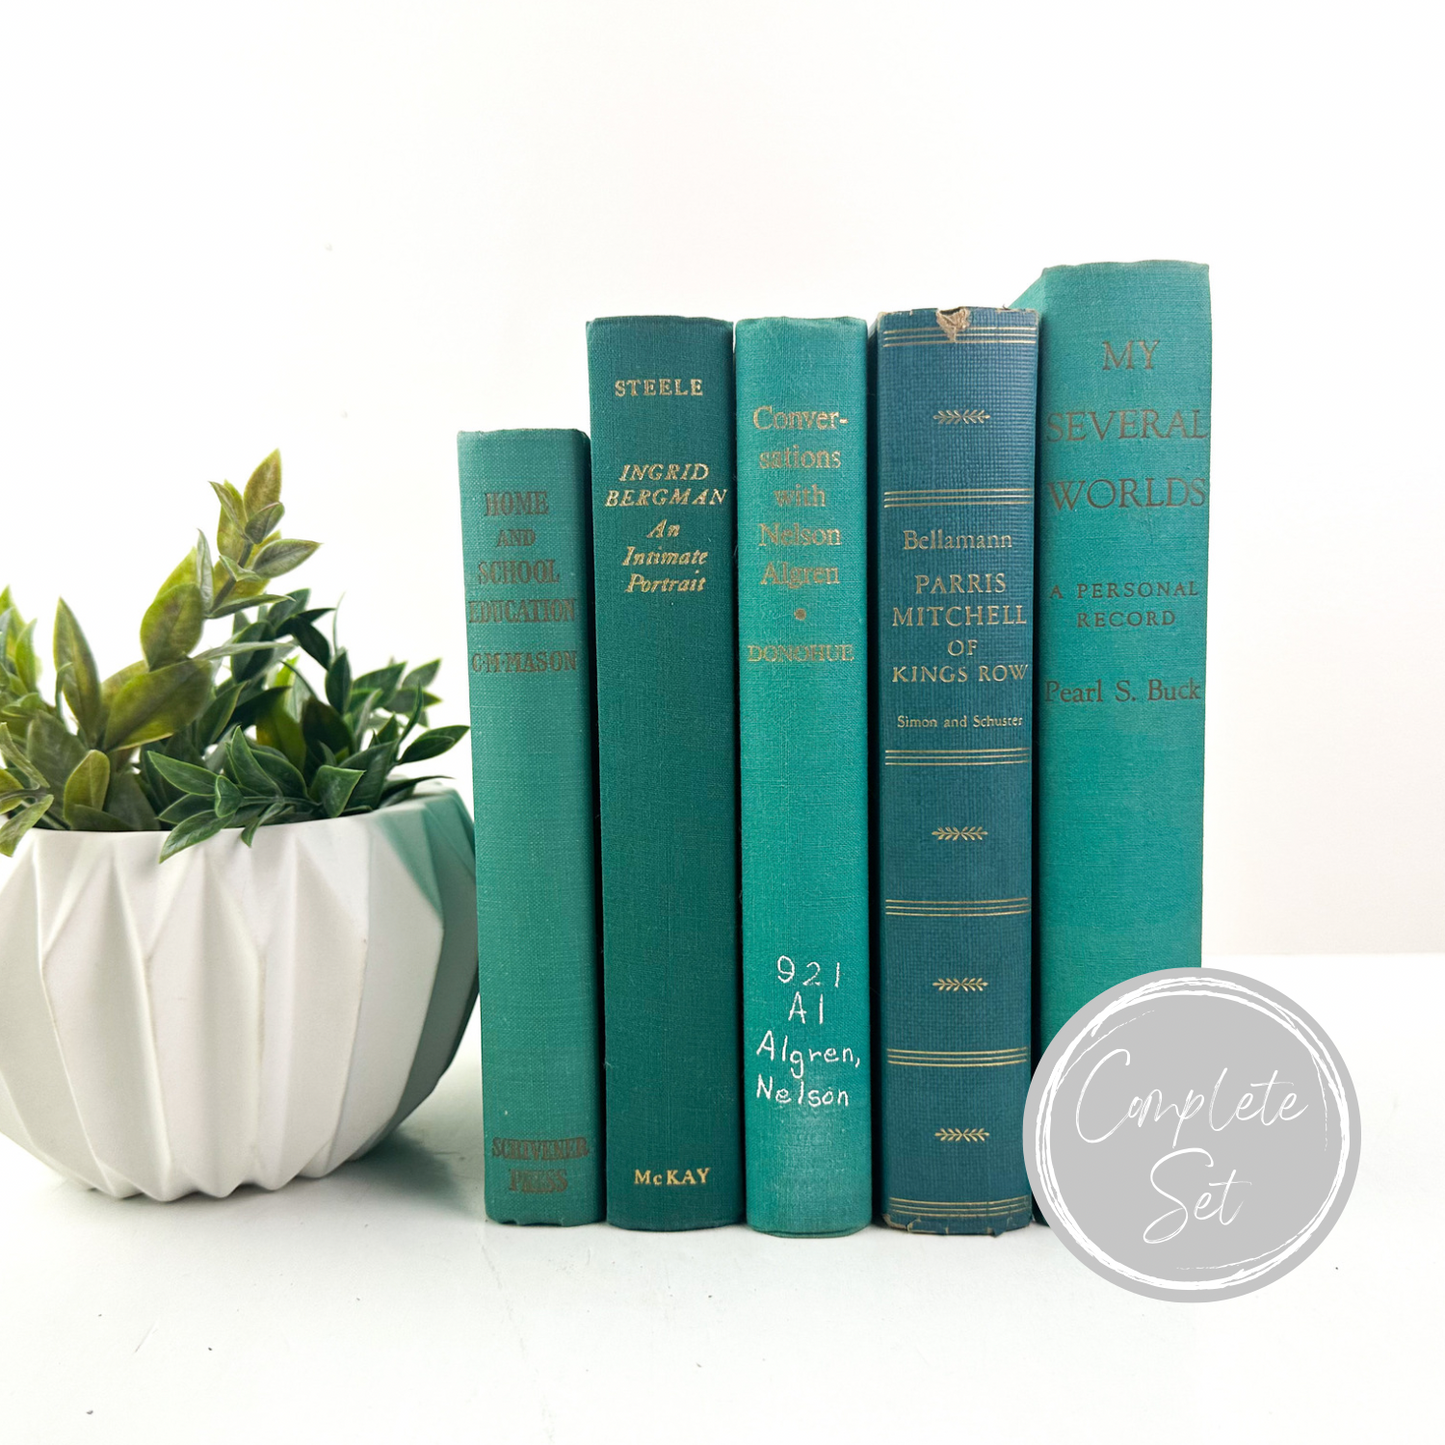 Turquoise Book Set